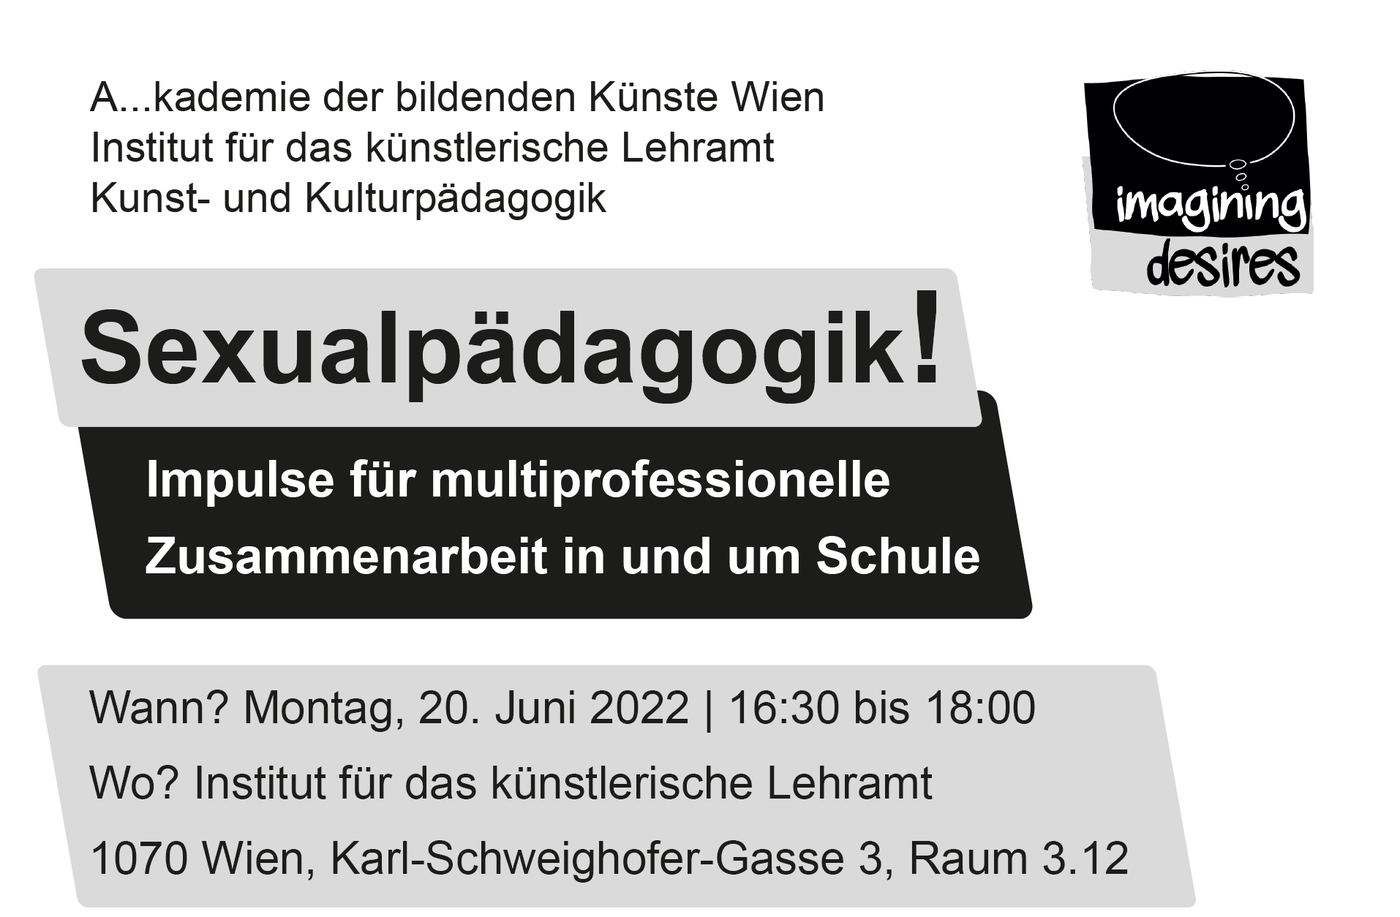 Flyer of the event with black text of the title and date on white paper